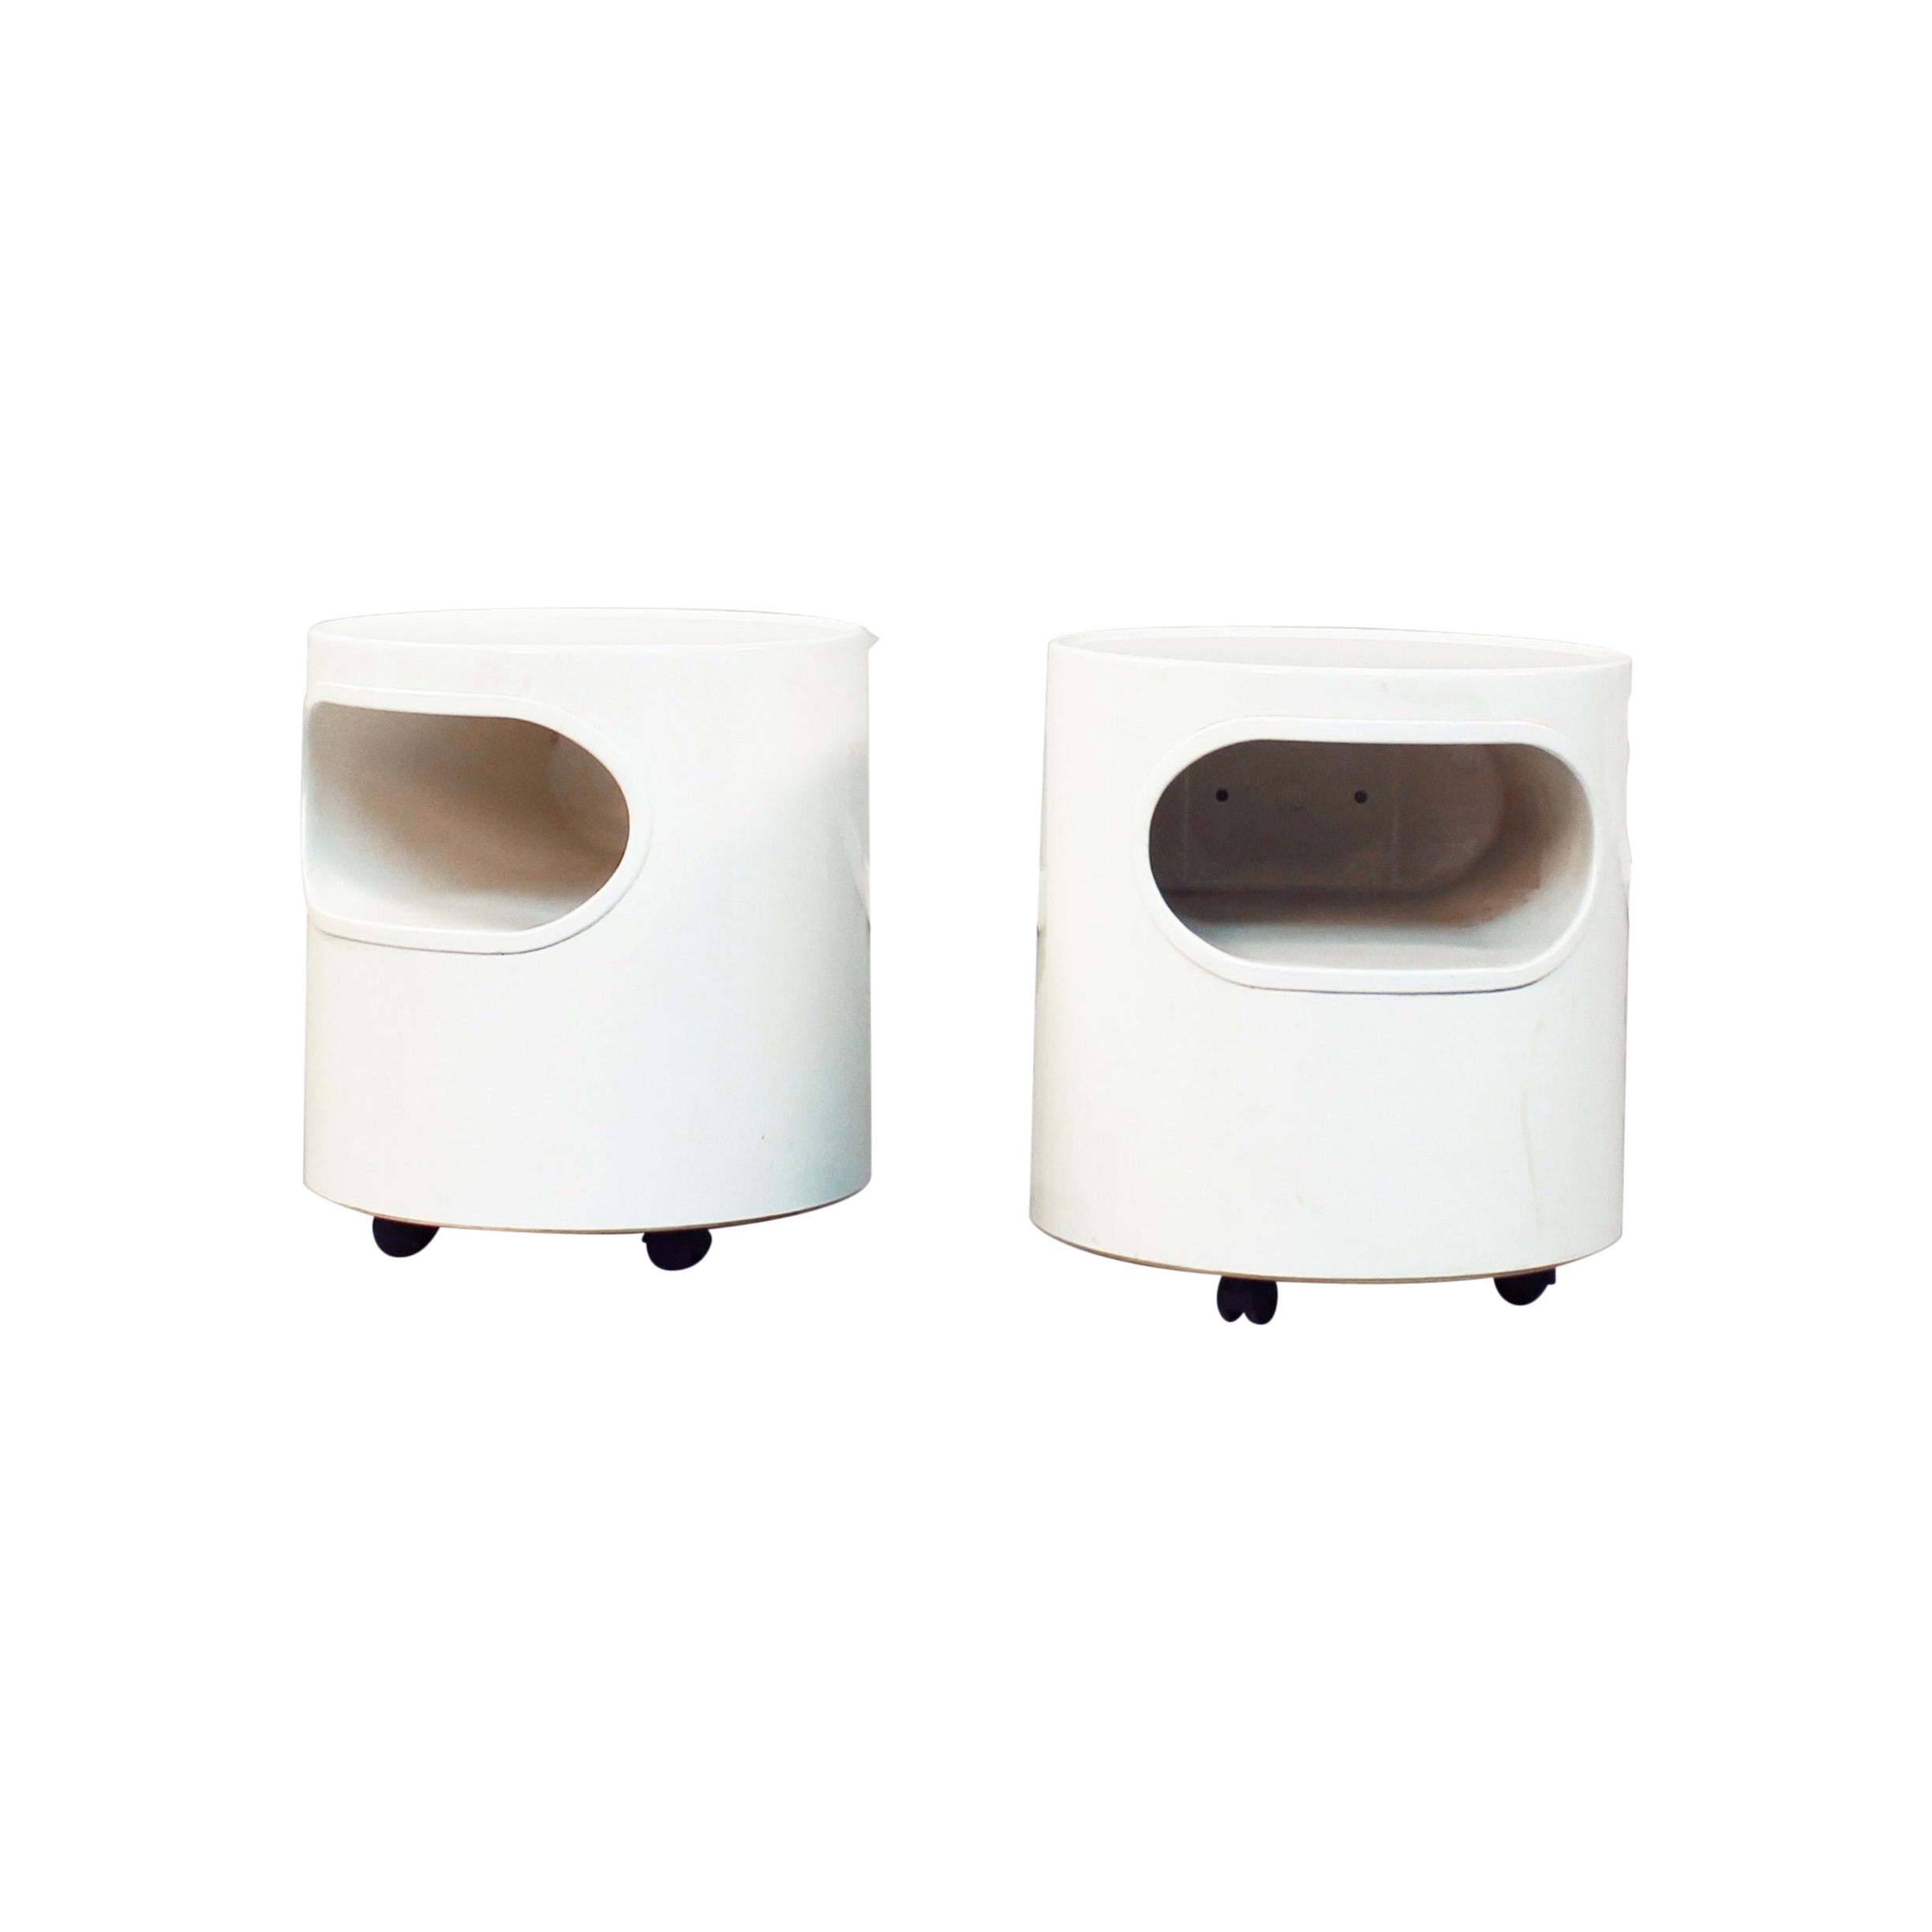 Italian Pair of Bedside Tables Giano-Giano by Emma Gismondi for Artemide, 1970s